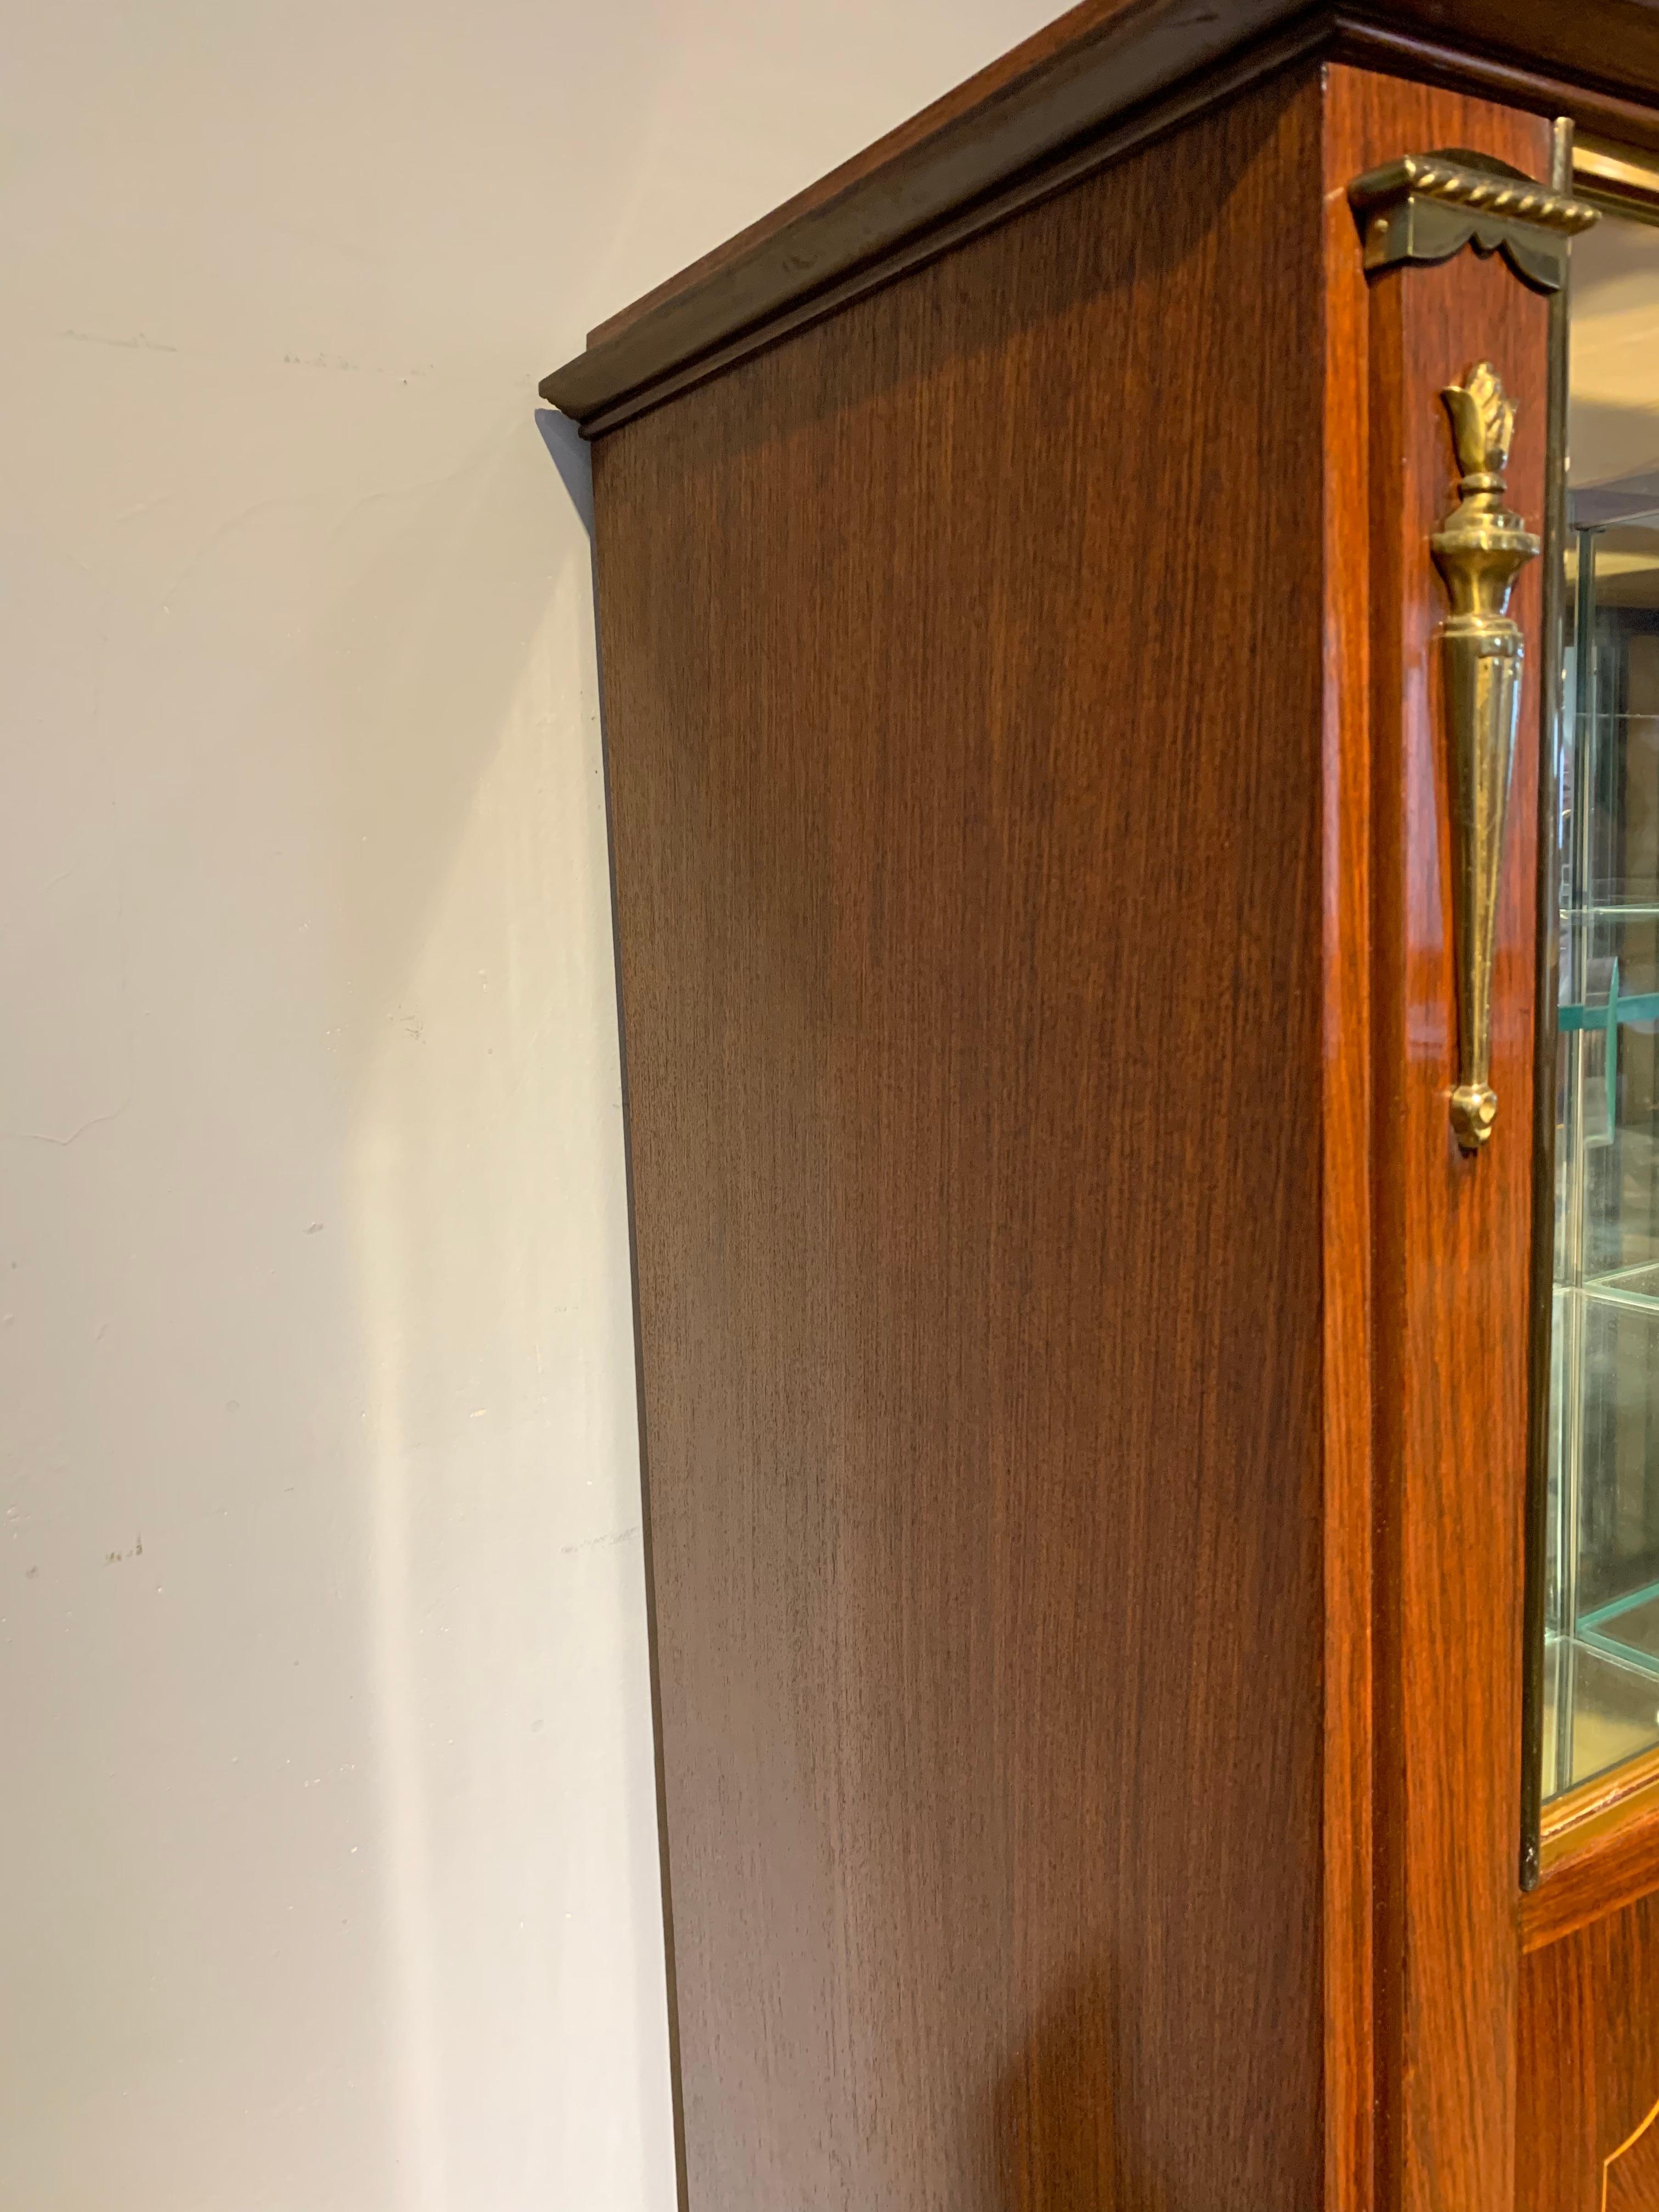 Mid-Century Modern Display Cabinet In Good Condition For Sale In Honiton, Devon